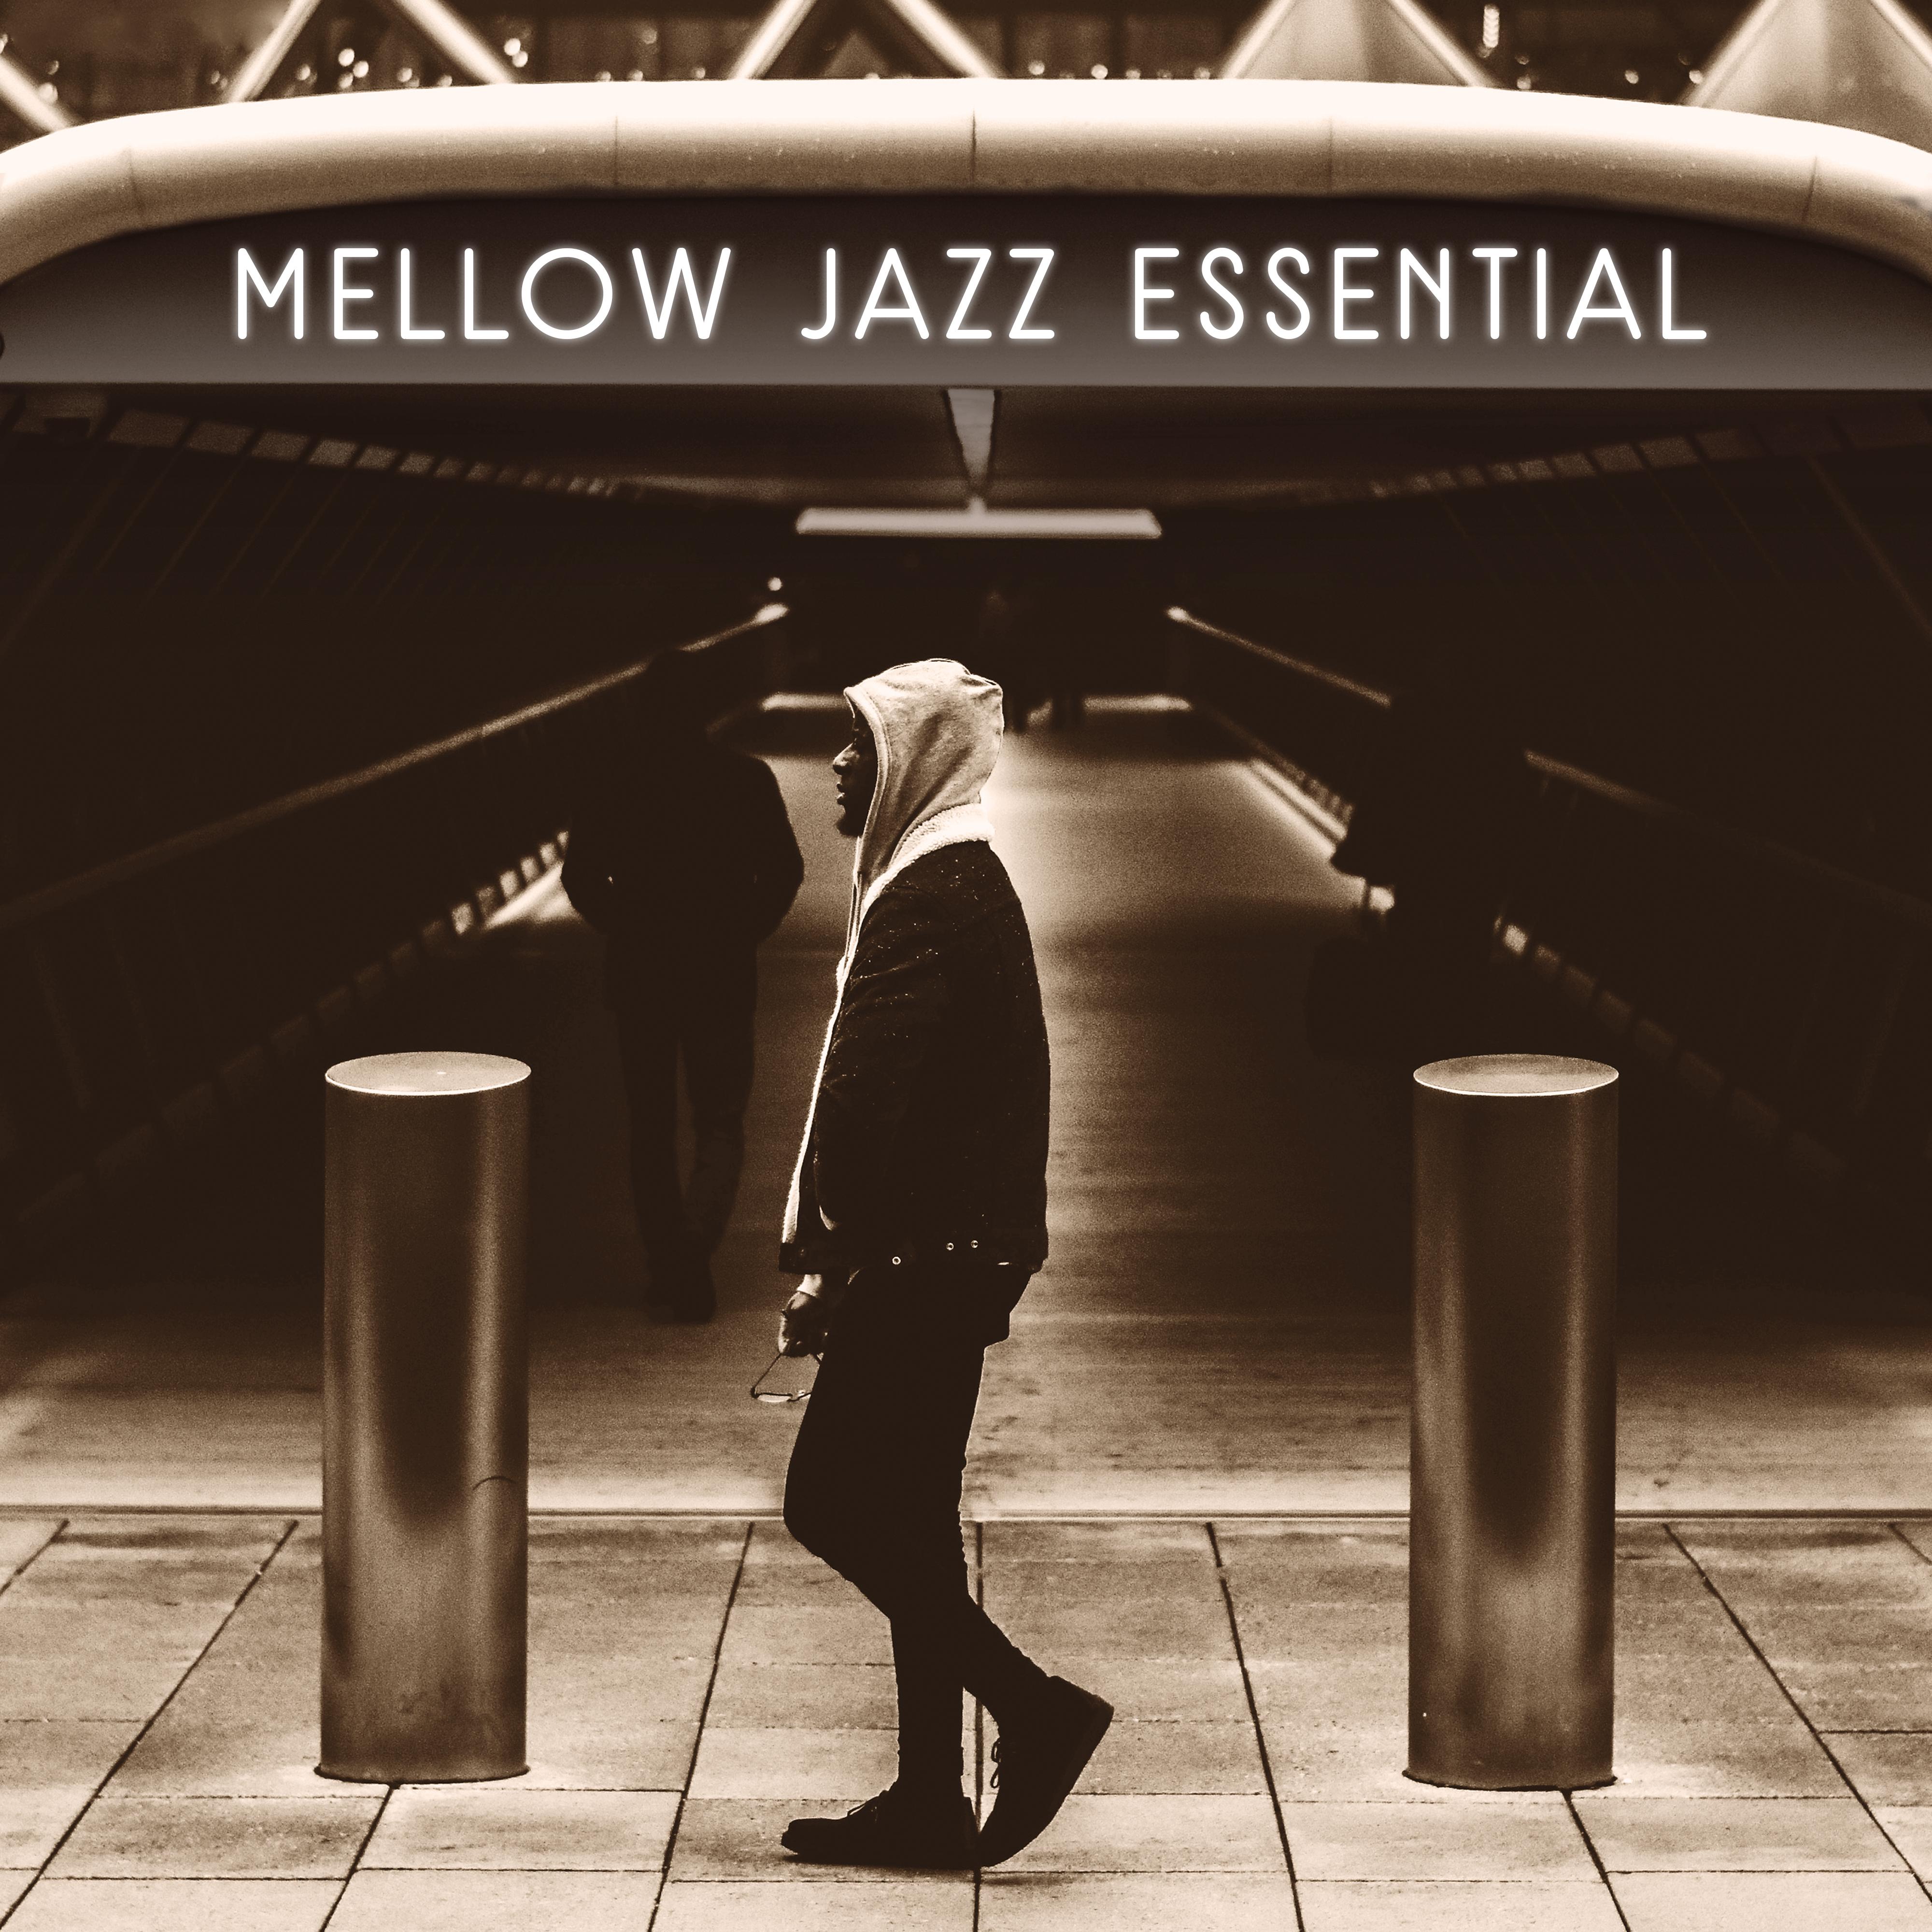 Mellow Jazz Essential  Soft Sounds of Ambient Jazz, Instrumental Music, Night Piano Jazz, Solo Piano